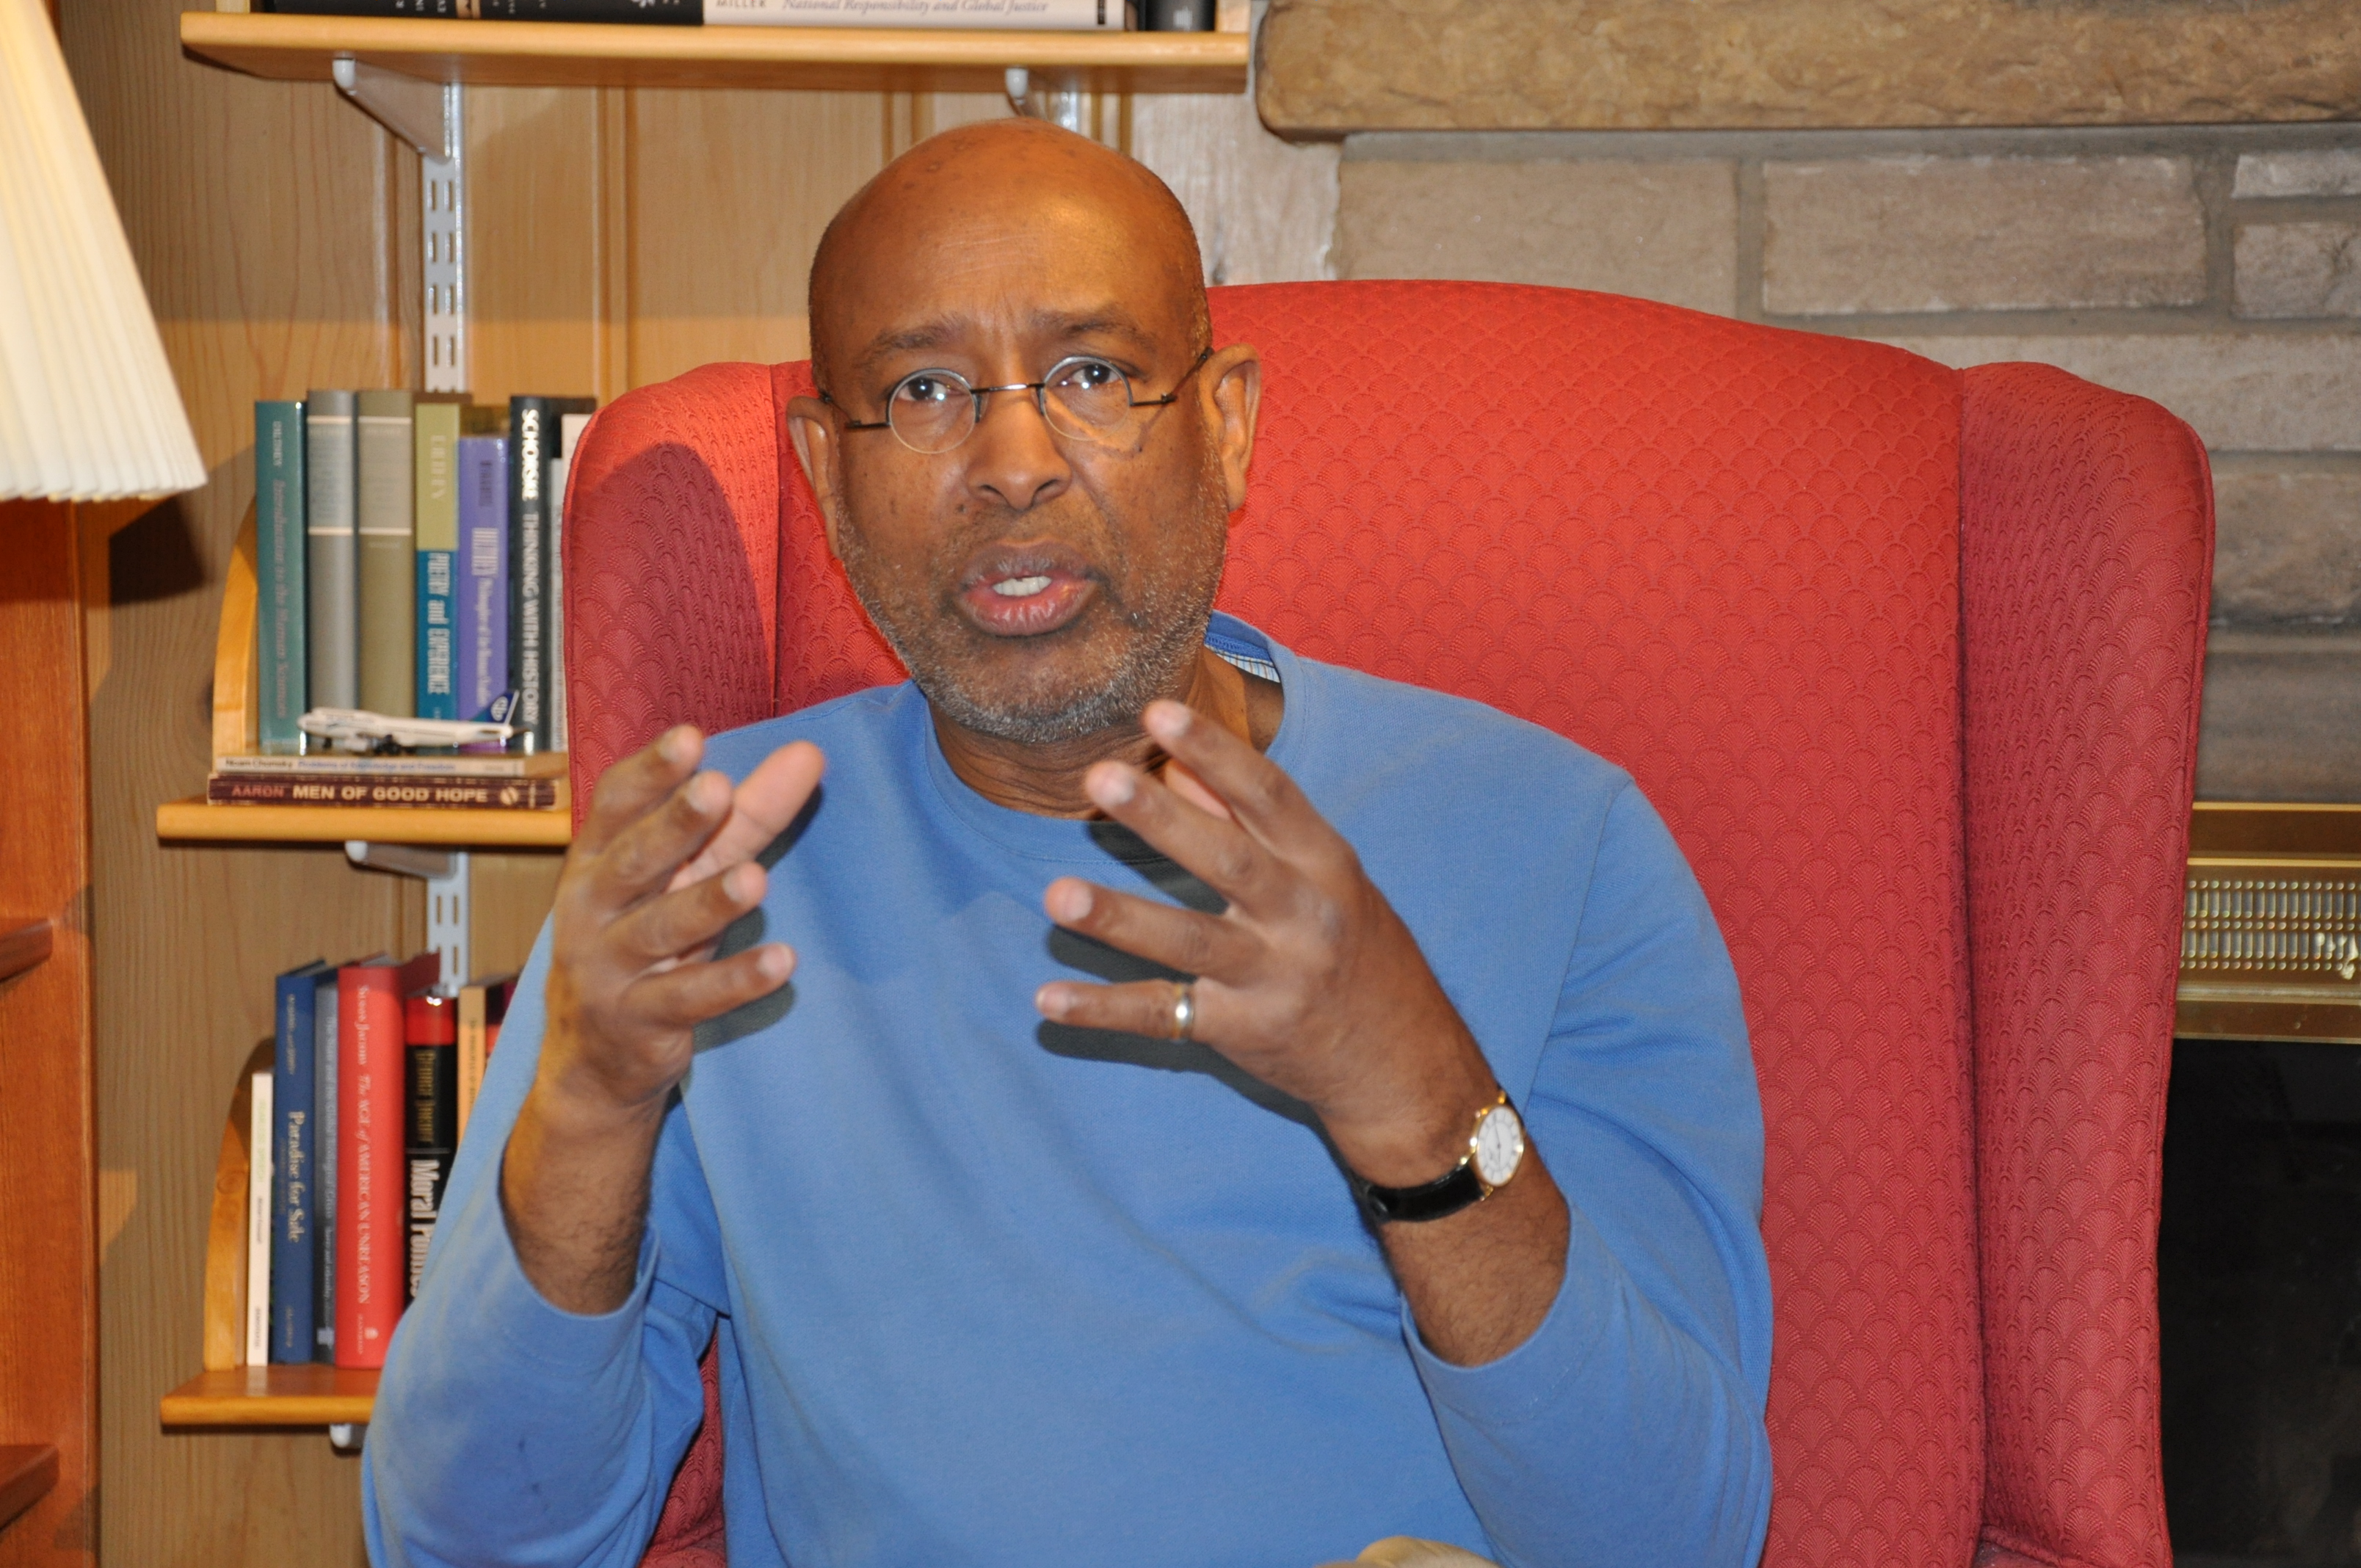 A man with glasses wearing a blue sweater gestures while speaking, seated in a red armchair in a room with books.